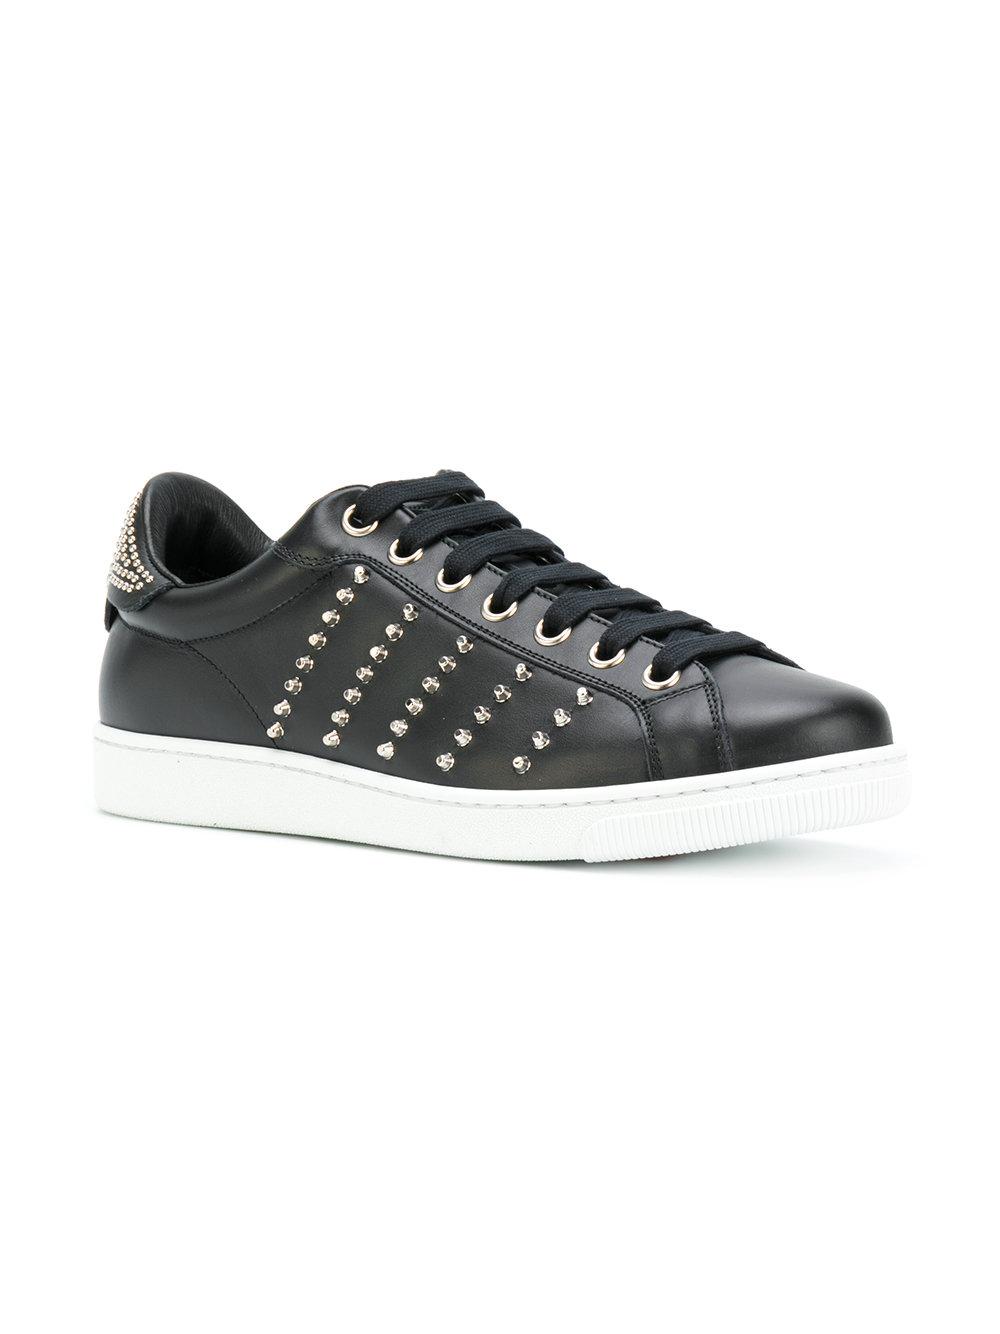 DSquared² Leather Studded Tennis Club Sneakers in Black for Men - Lyst